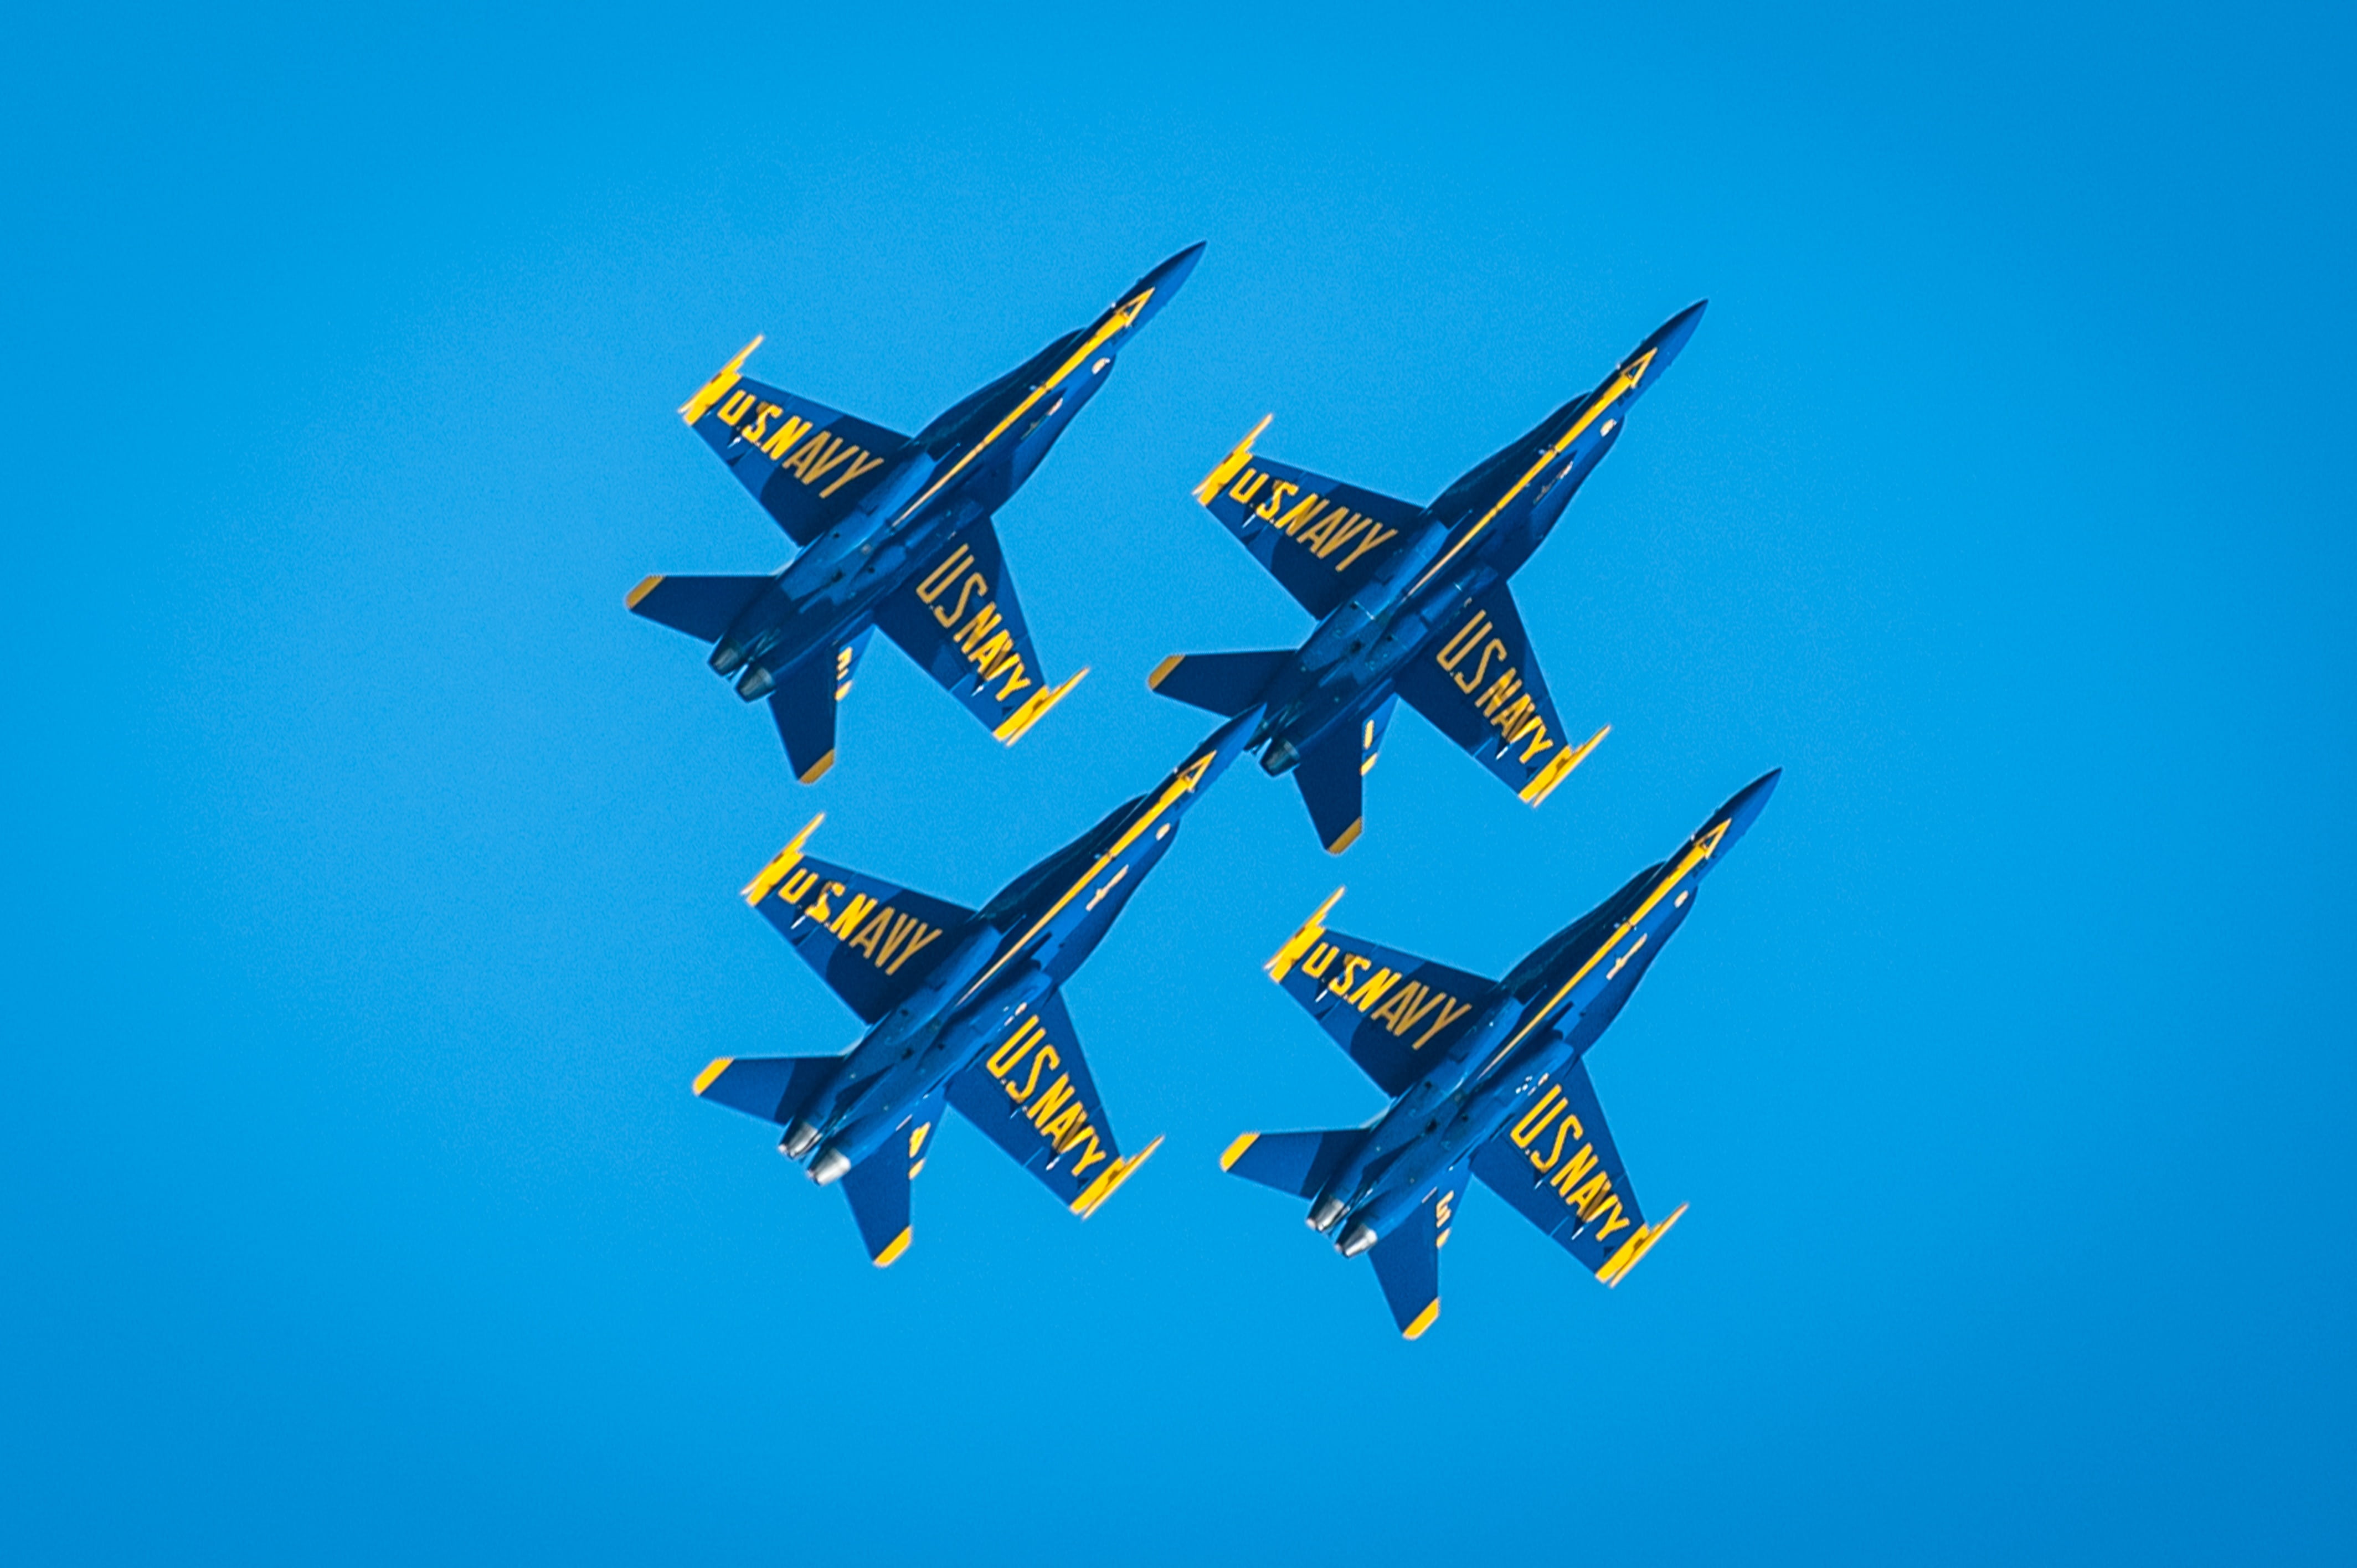 blue angels, jet, fighter, navy, military, plane, air, sky